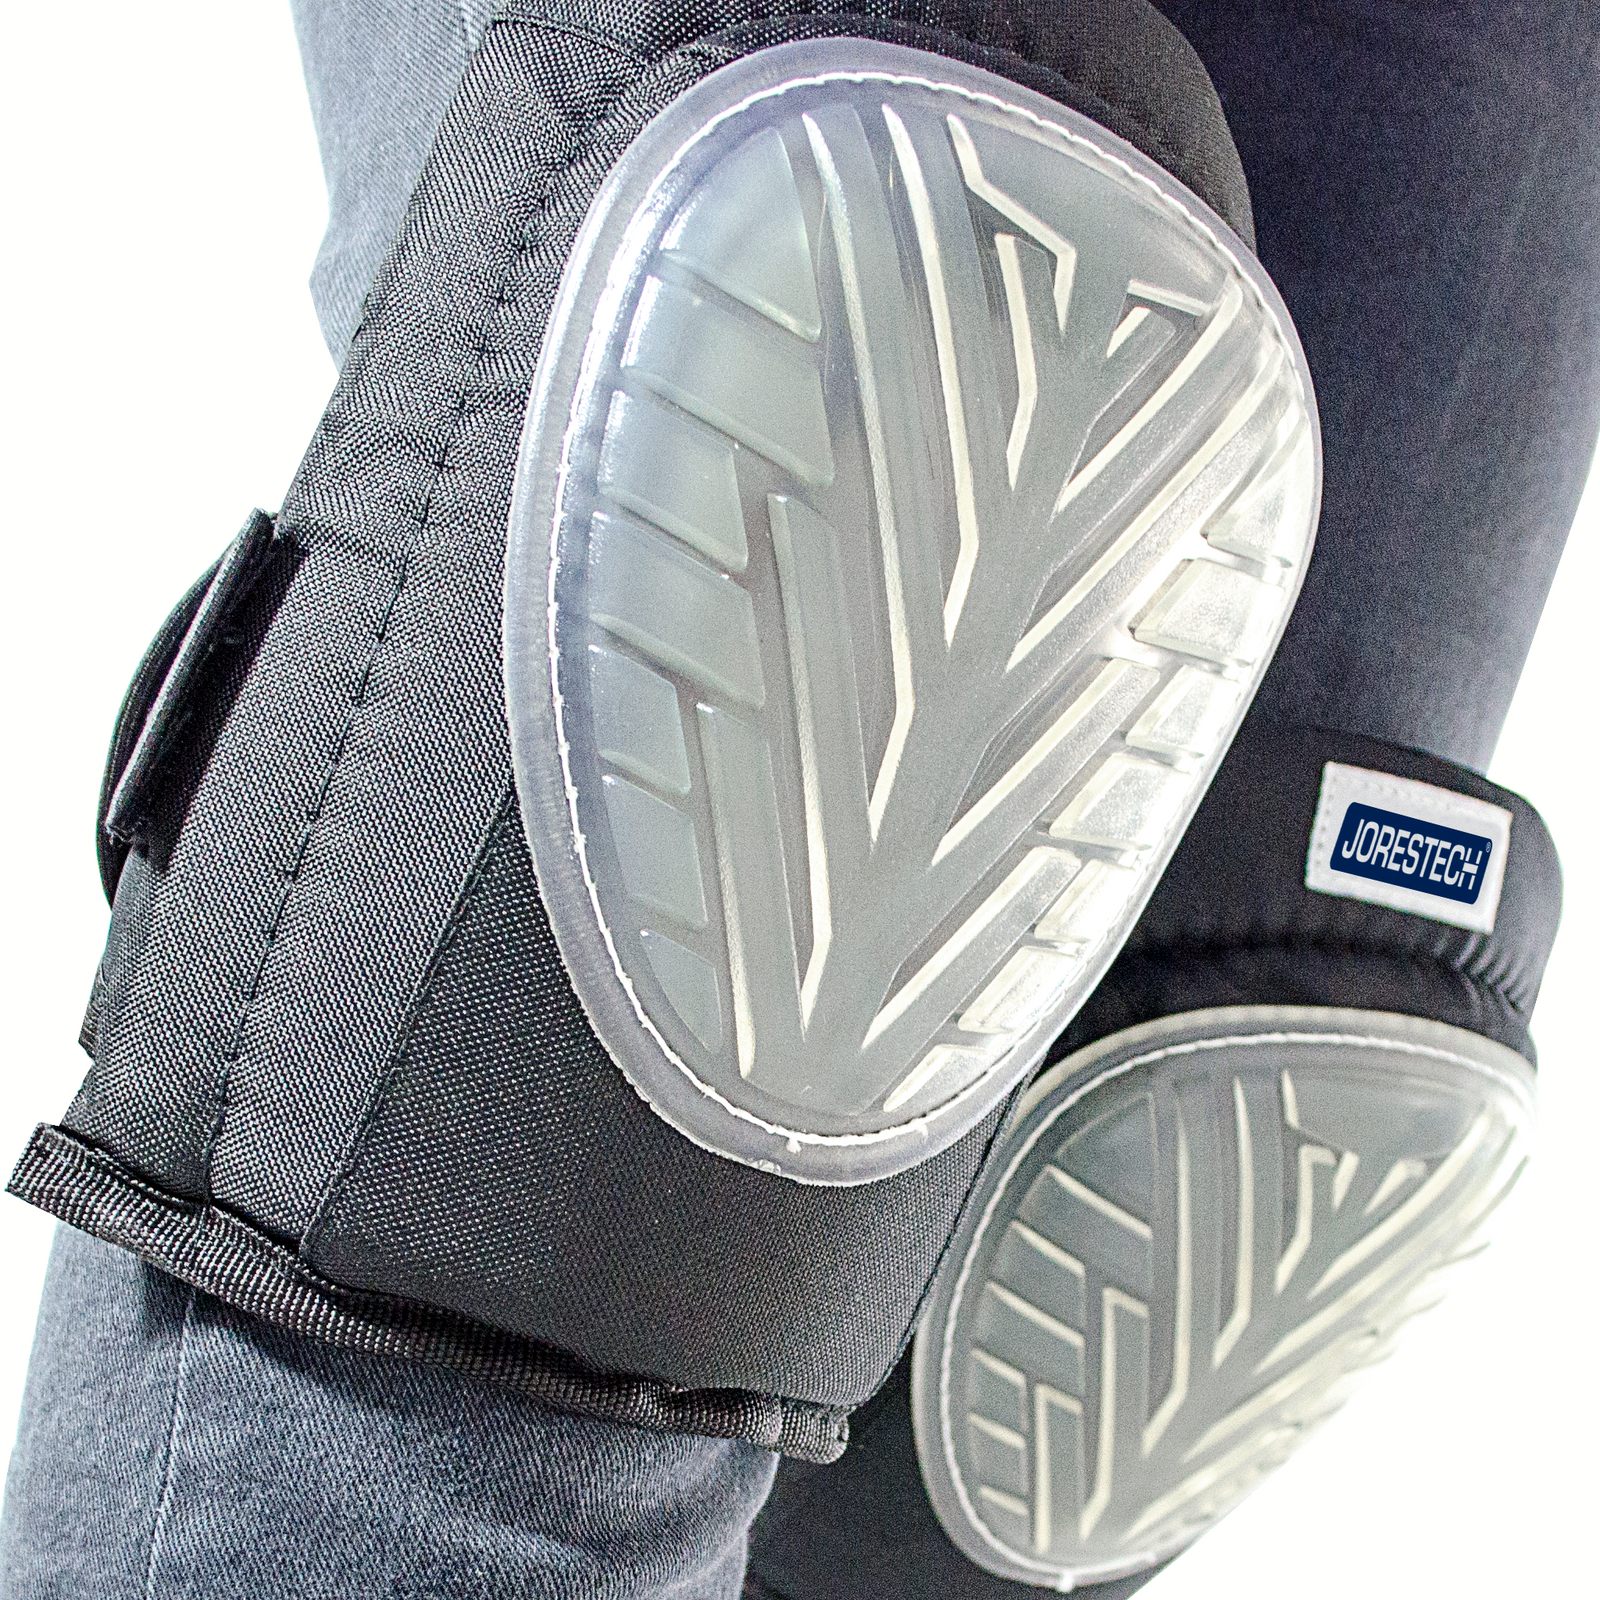 Close up of the knees of a person wearing the Jorestech anti-skid knee pads with gel filled caps and size adjustable straps